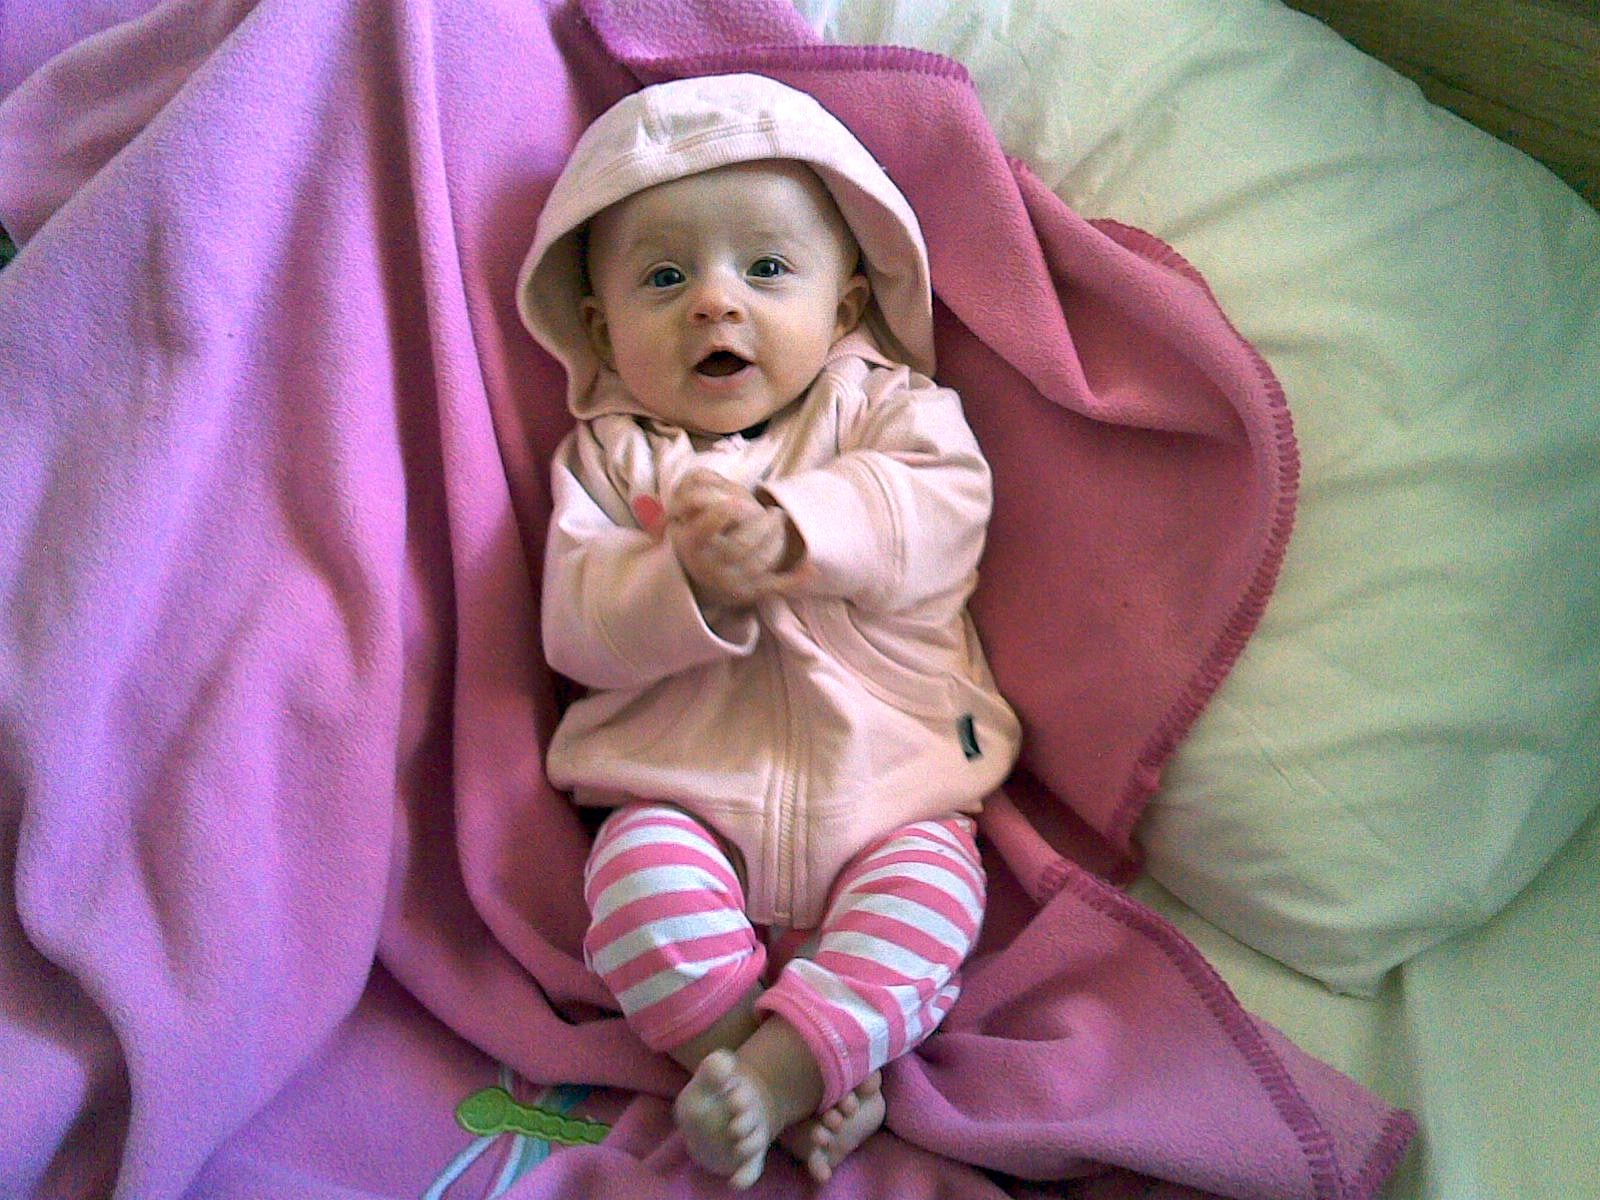 A photo of a small baby lying on a pink blanket with pink and white stripy pants on, and a pink hoodie. She has her mouth open in a big O shape and is mid-flailing her arms around.